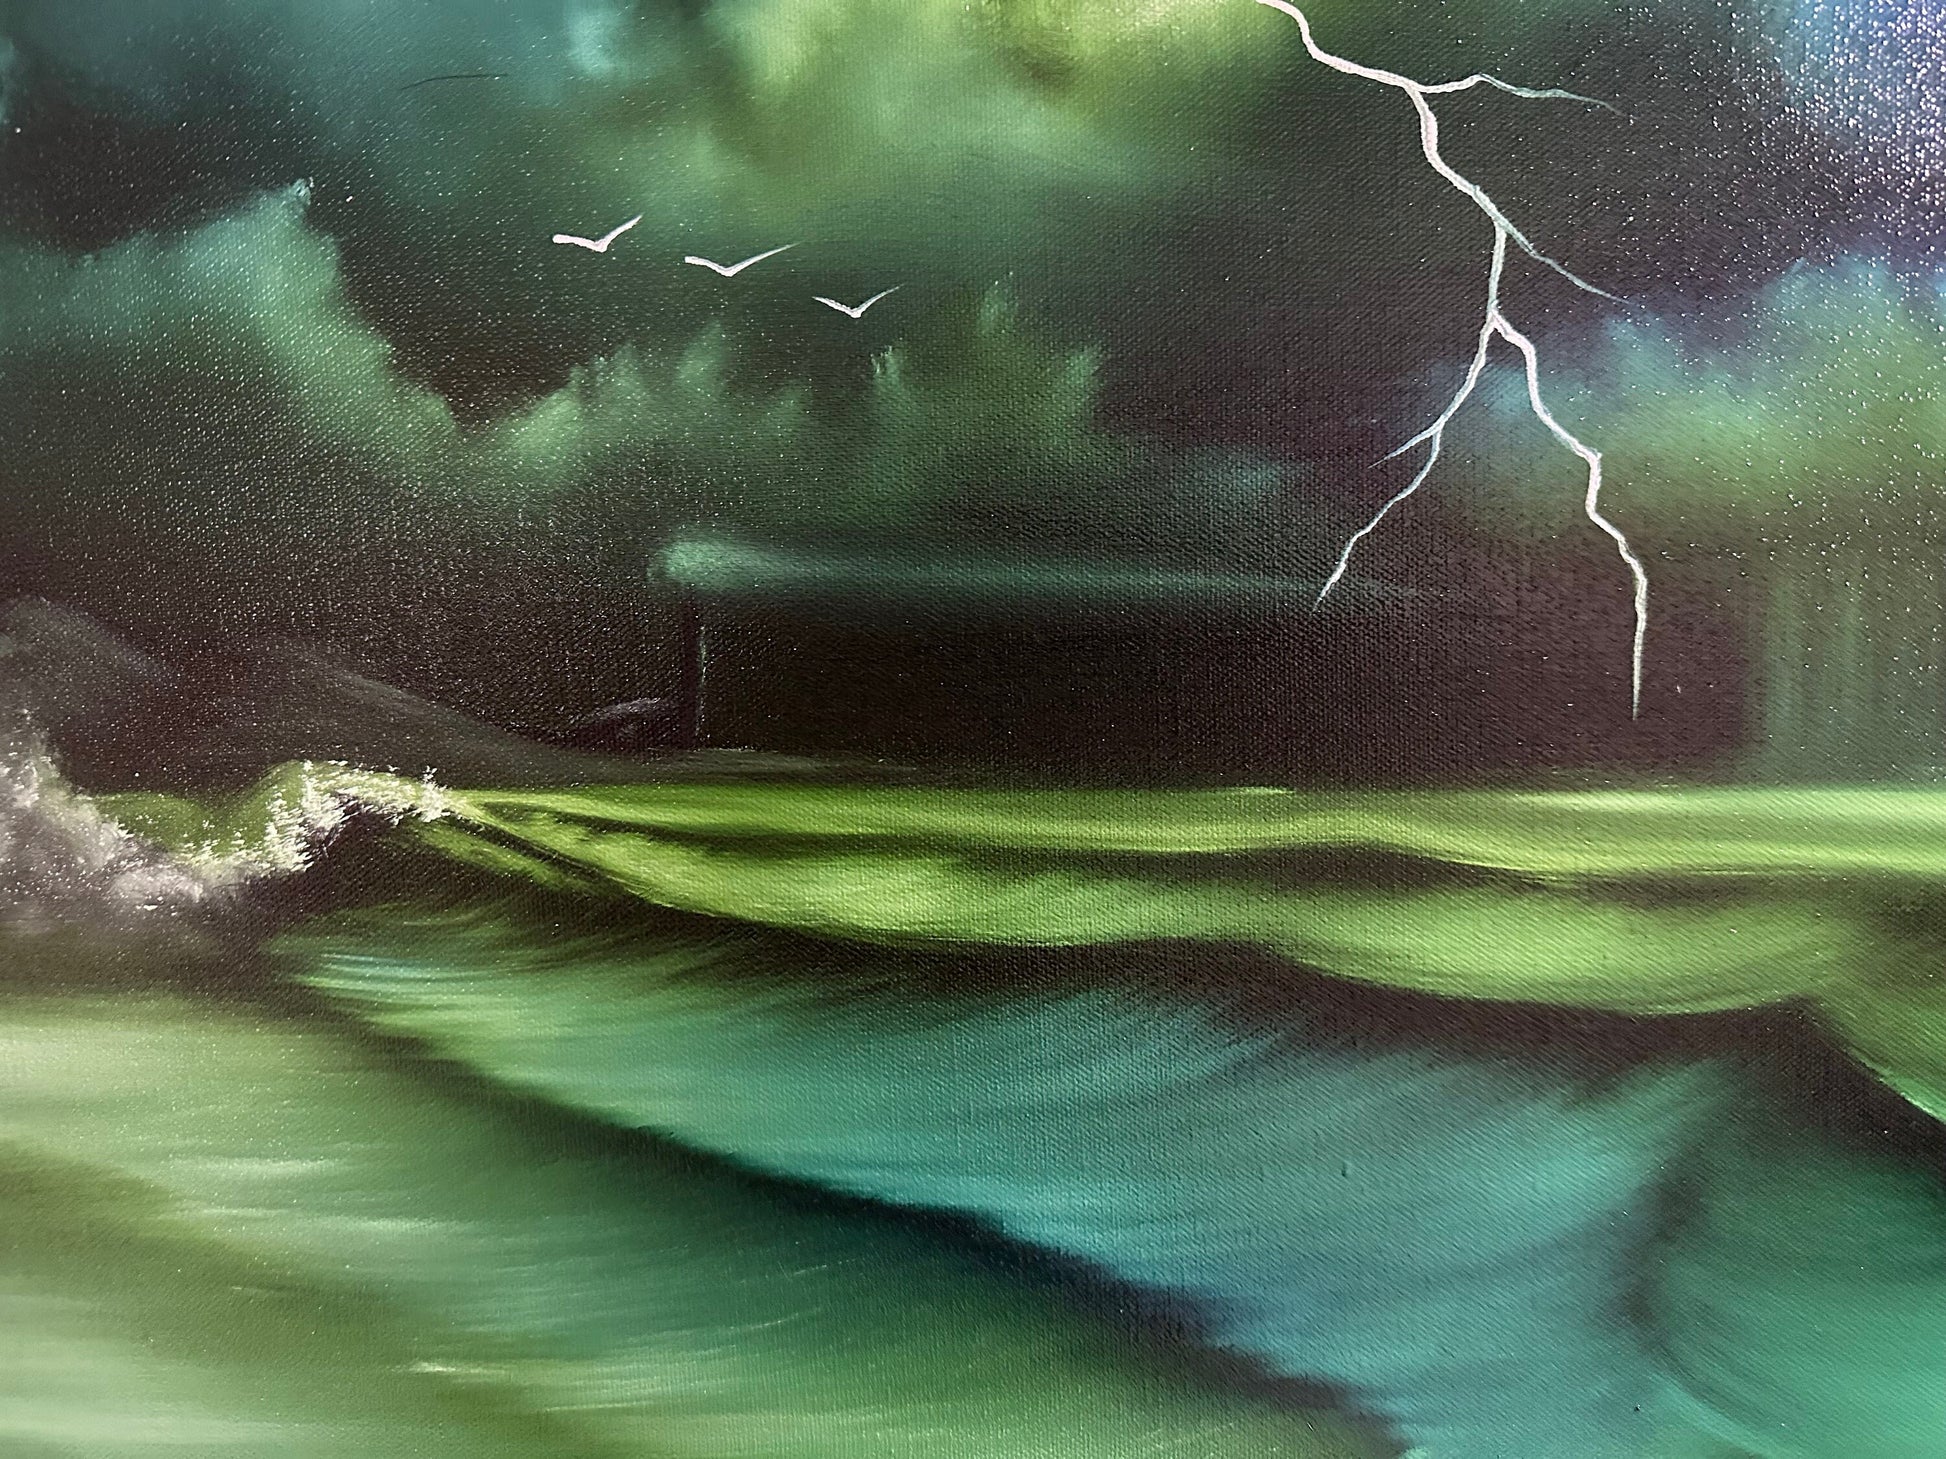 Painting 931 - 24x24" Pro Series Canvas Blue/Green Seascape with Soft Waves painted Live on TikTok on 9/4/23 by PaintWithJosh